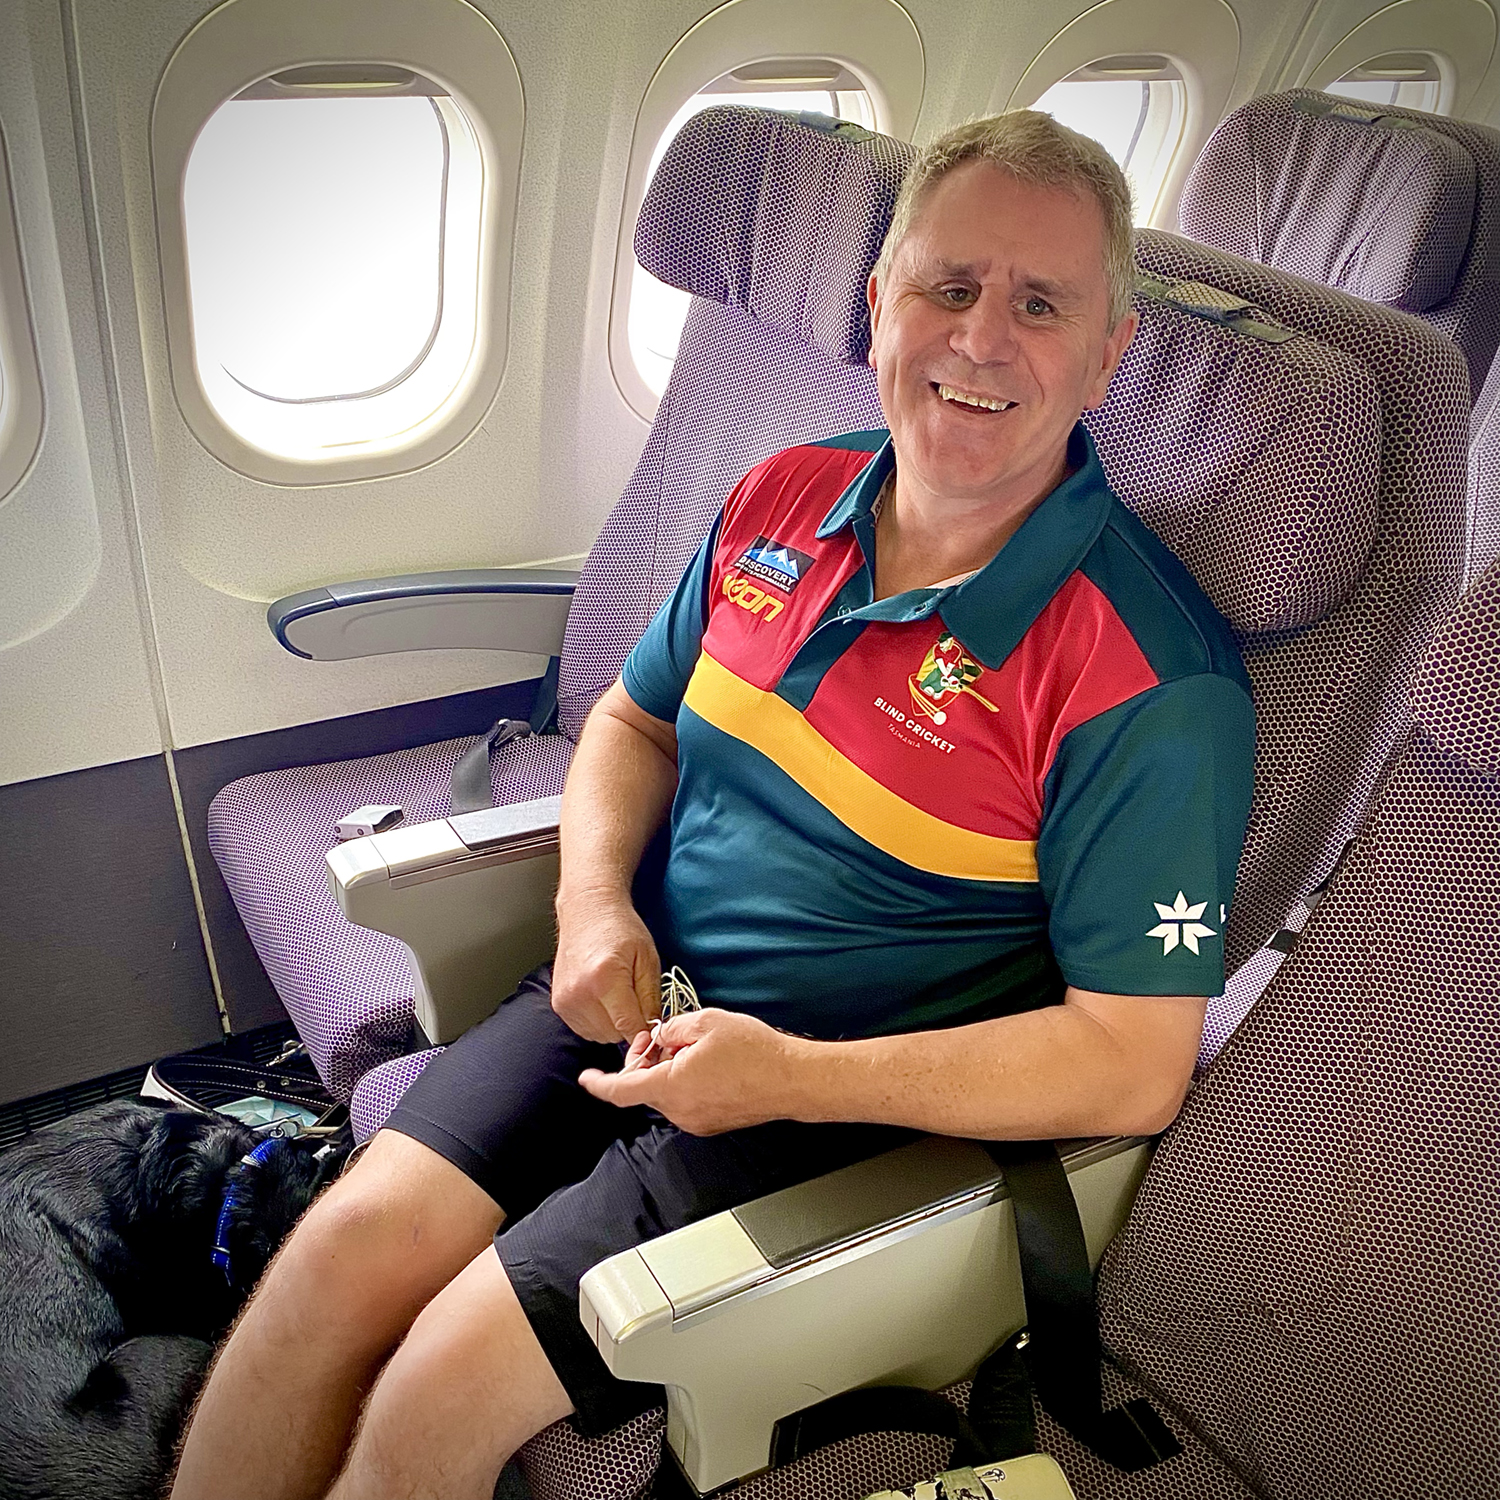 Phil Menzie and his guide dog 'Dudley' sitting in the front row of the plane on his way to the National Cricket Inclusion Championships with the other Tigers players